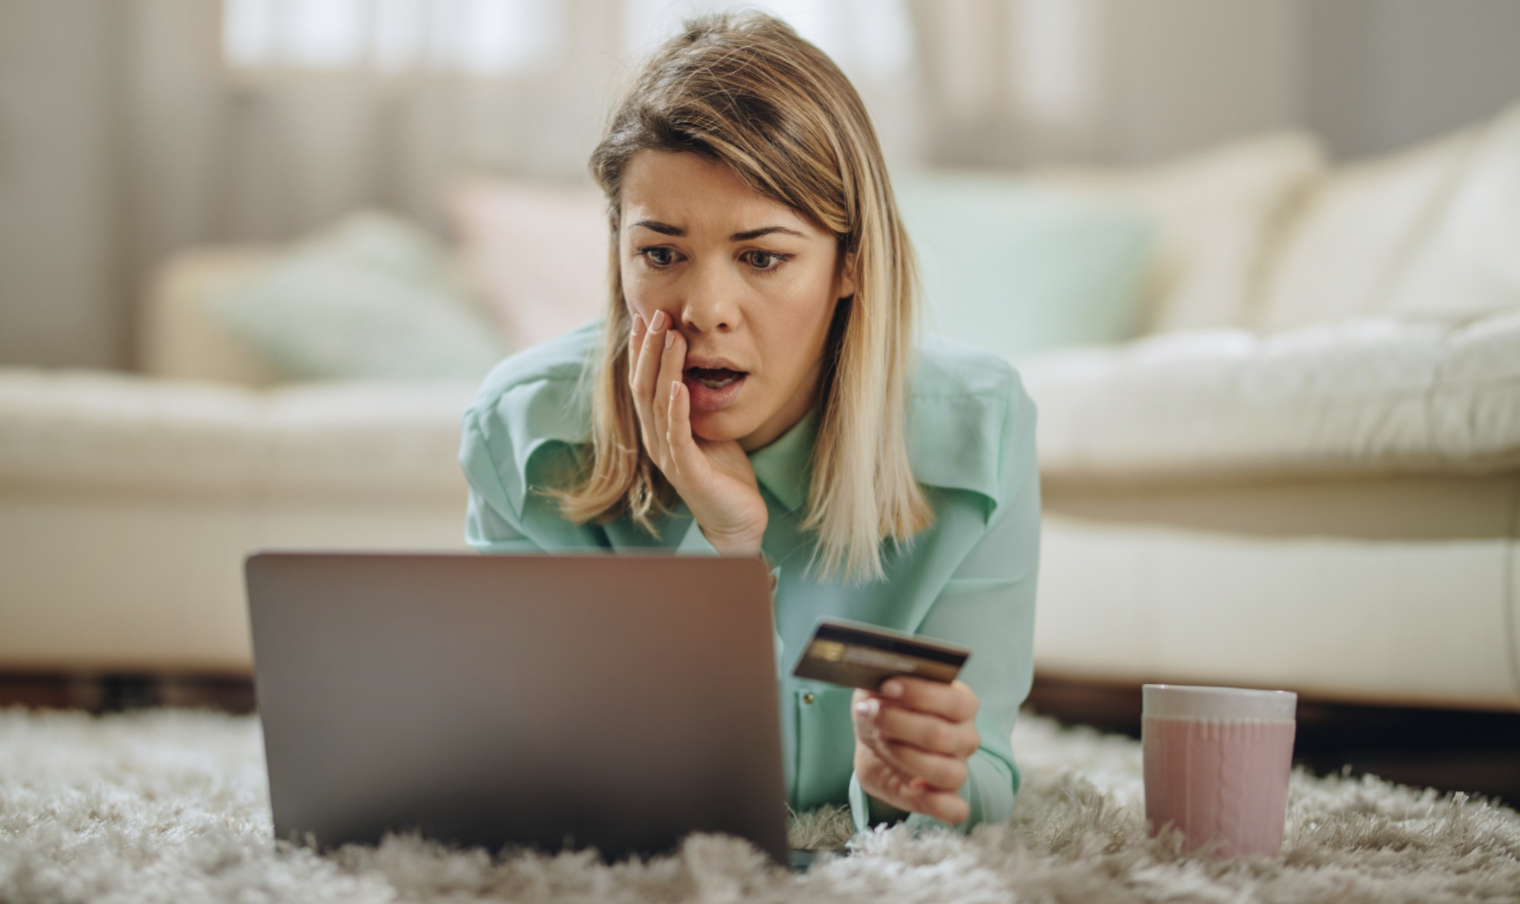 7 Credit Mistakes And How To Avoid Them